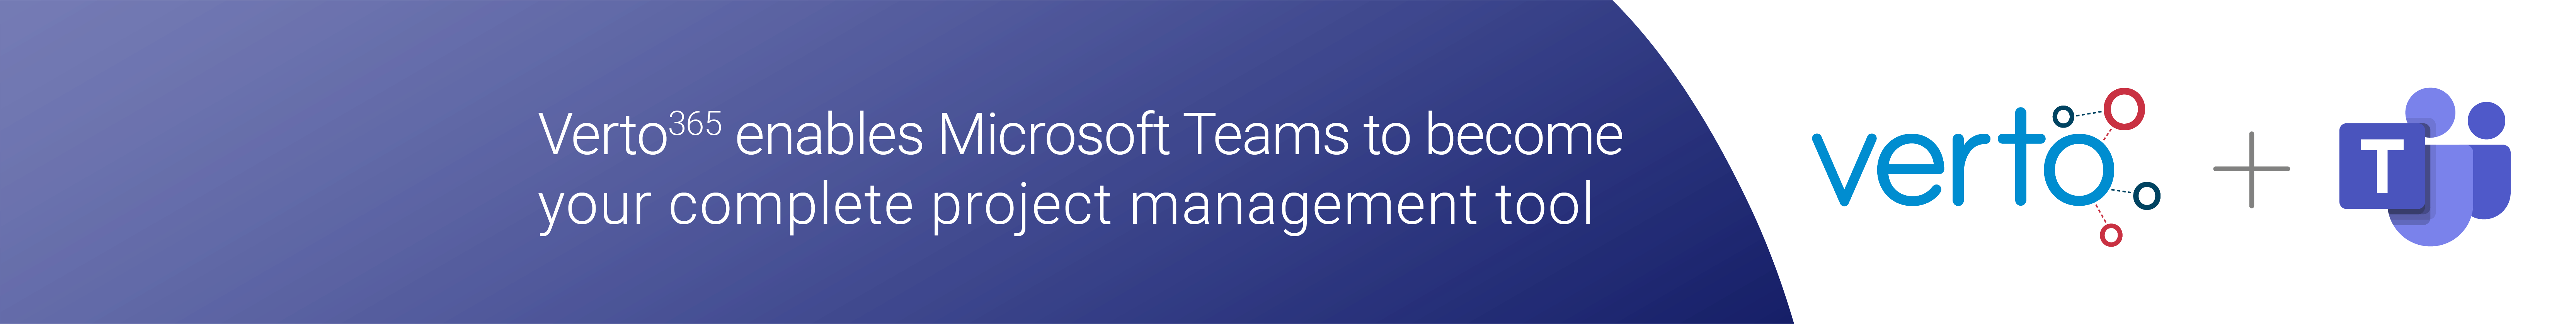 A new generation of Microsoft Teams apps are emerging